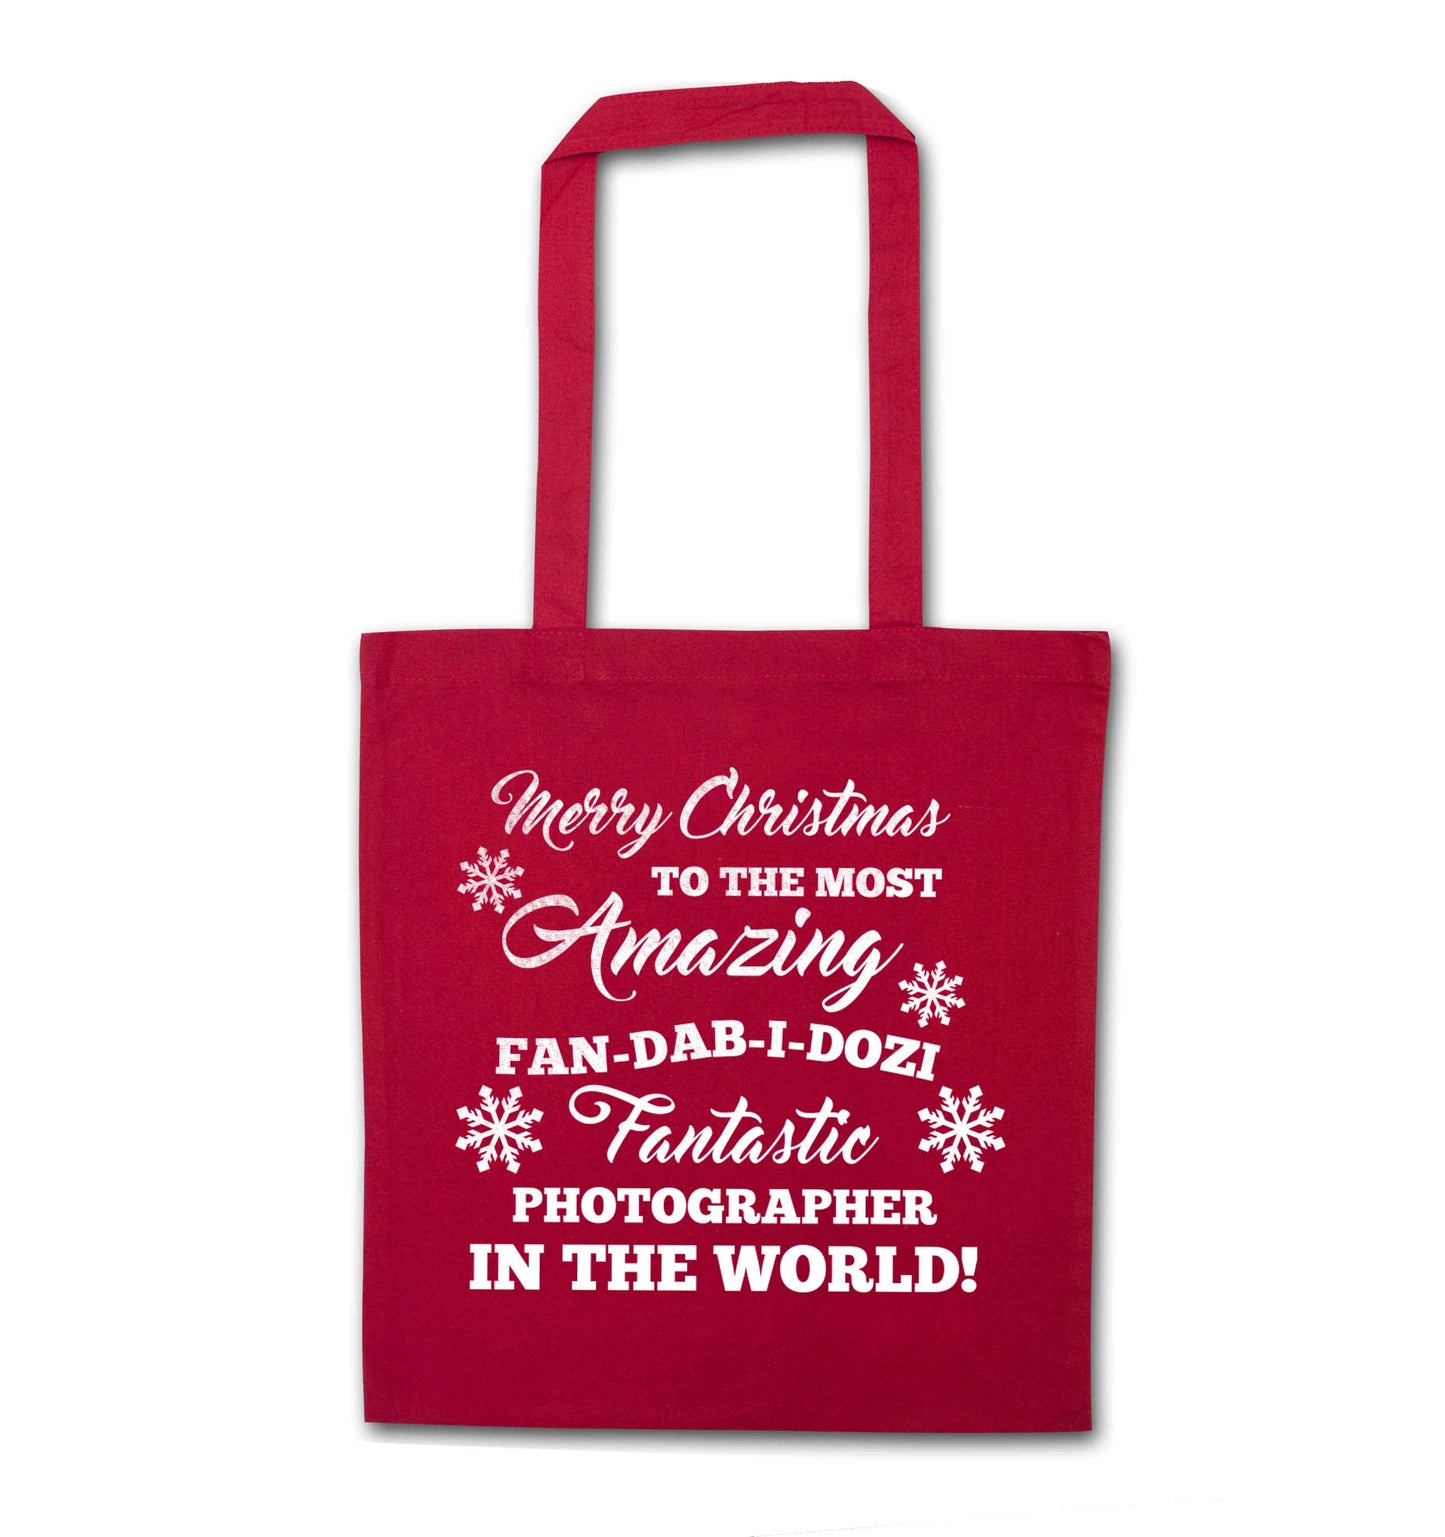 Merry Christmas to the most amazing fan-dab-i-dozi fantasic photographer in the world red tote bag